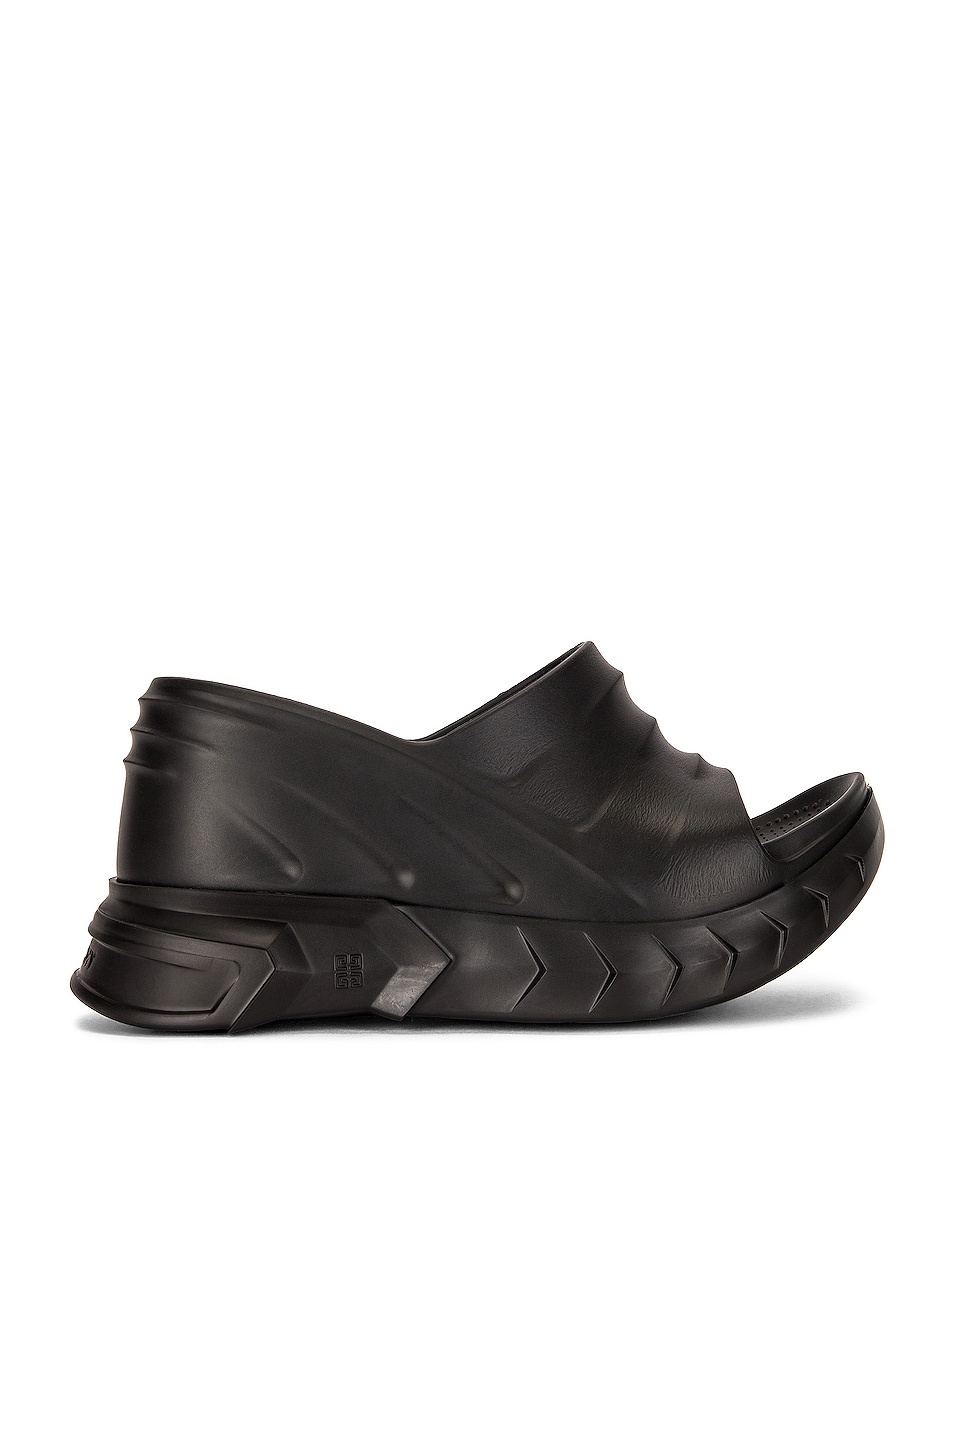 Image 1 of Givenchy Marshmallow Slider Wedge Sandals in Black